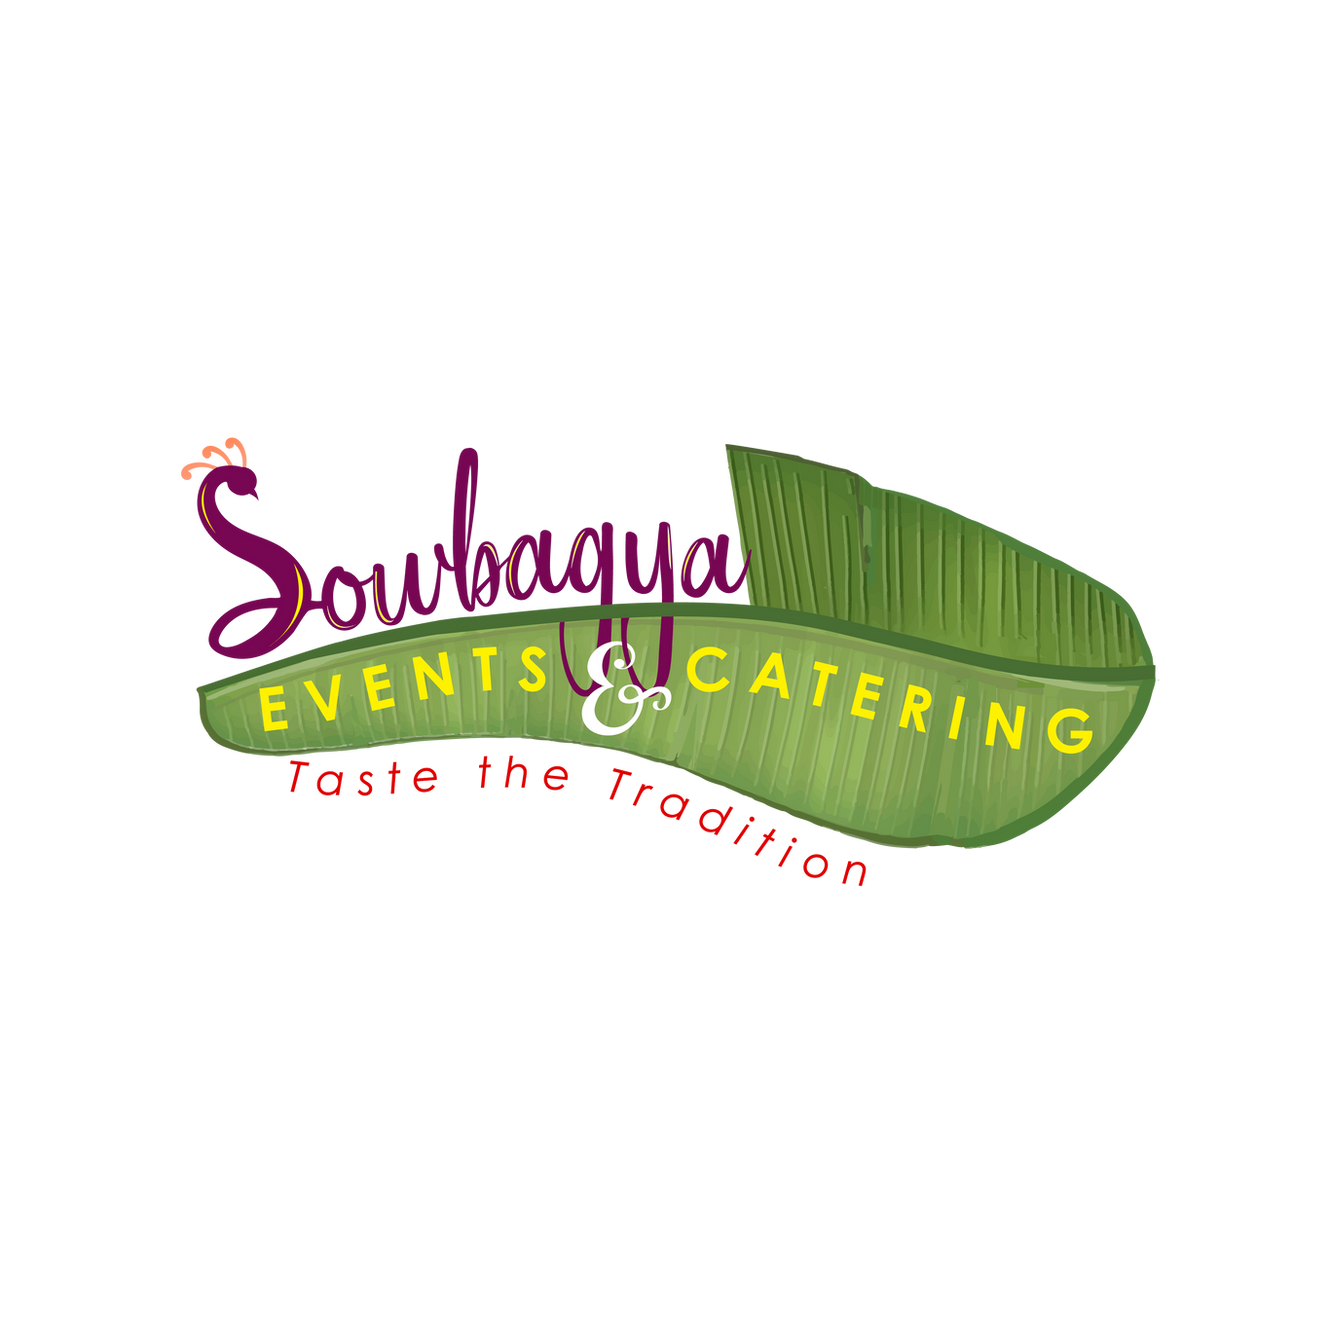 Sowbagya Catering|Catering Services|Event Services